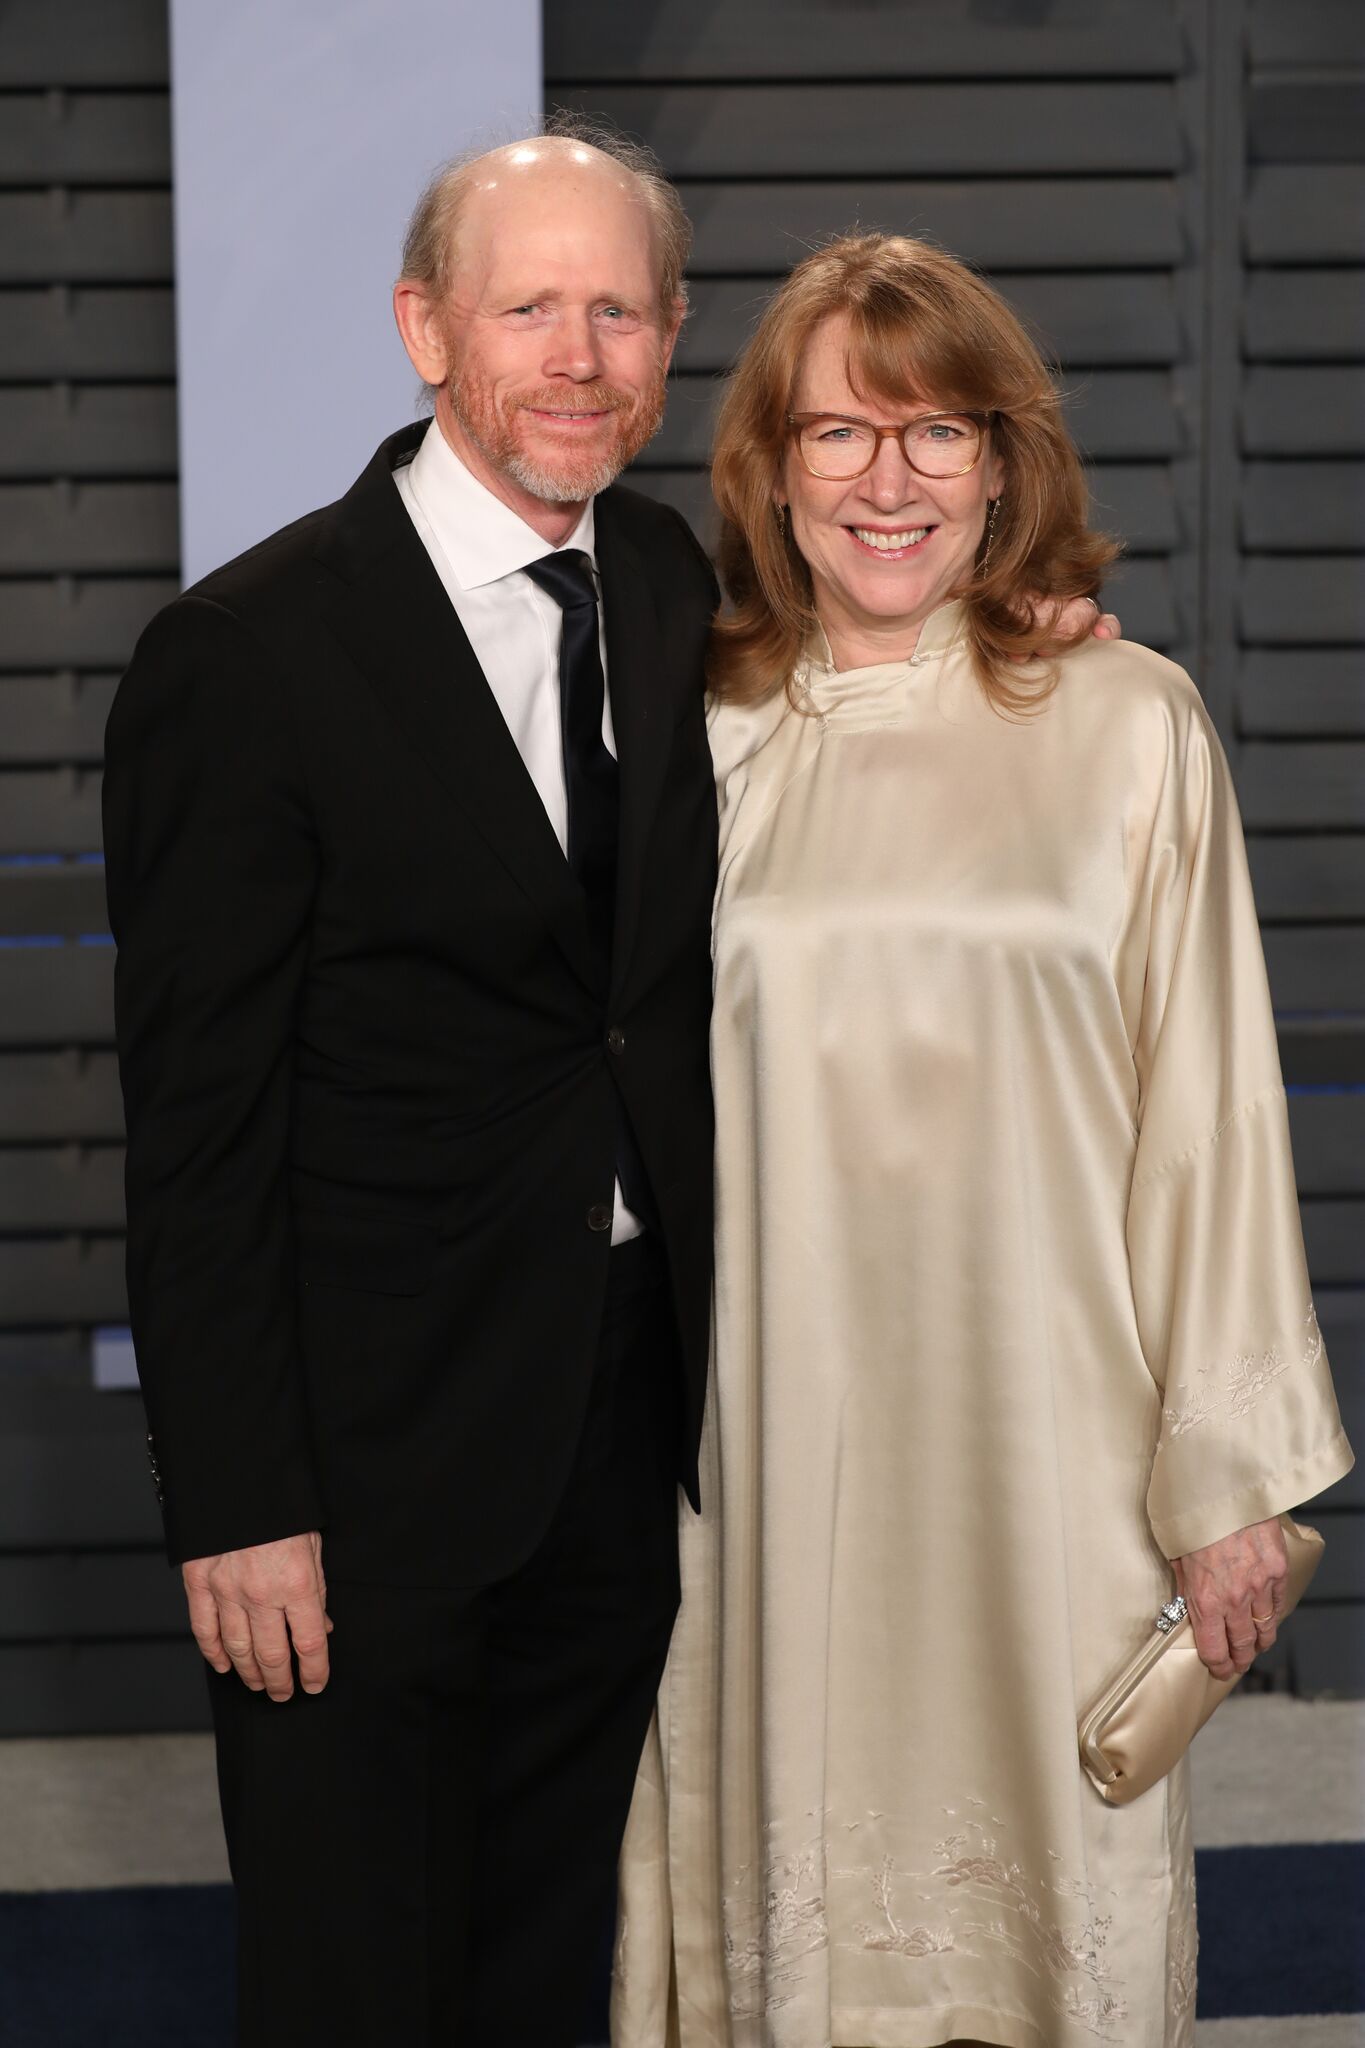 Ron Howard and Cheryl Howard attend the 2018 Vanity Fair Oscar Party hosted by Radhika Jones | Getty Images